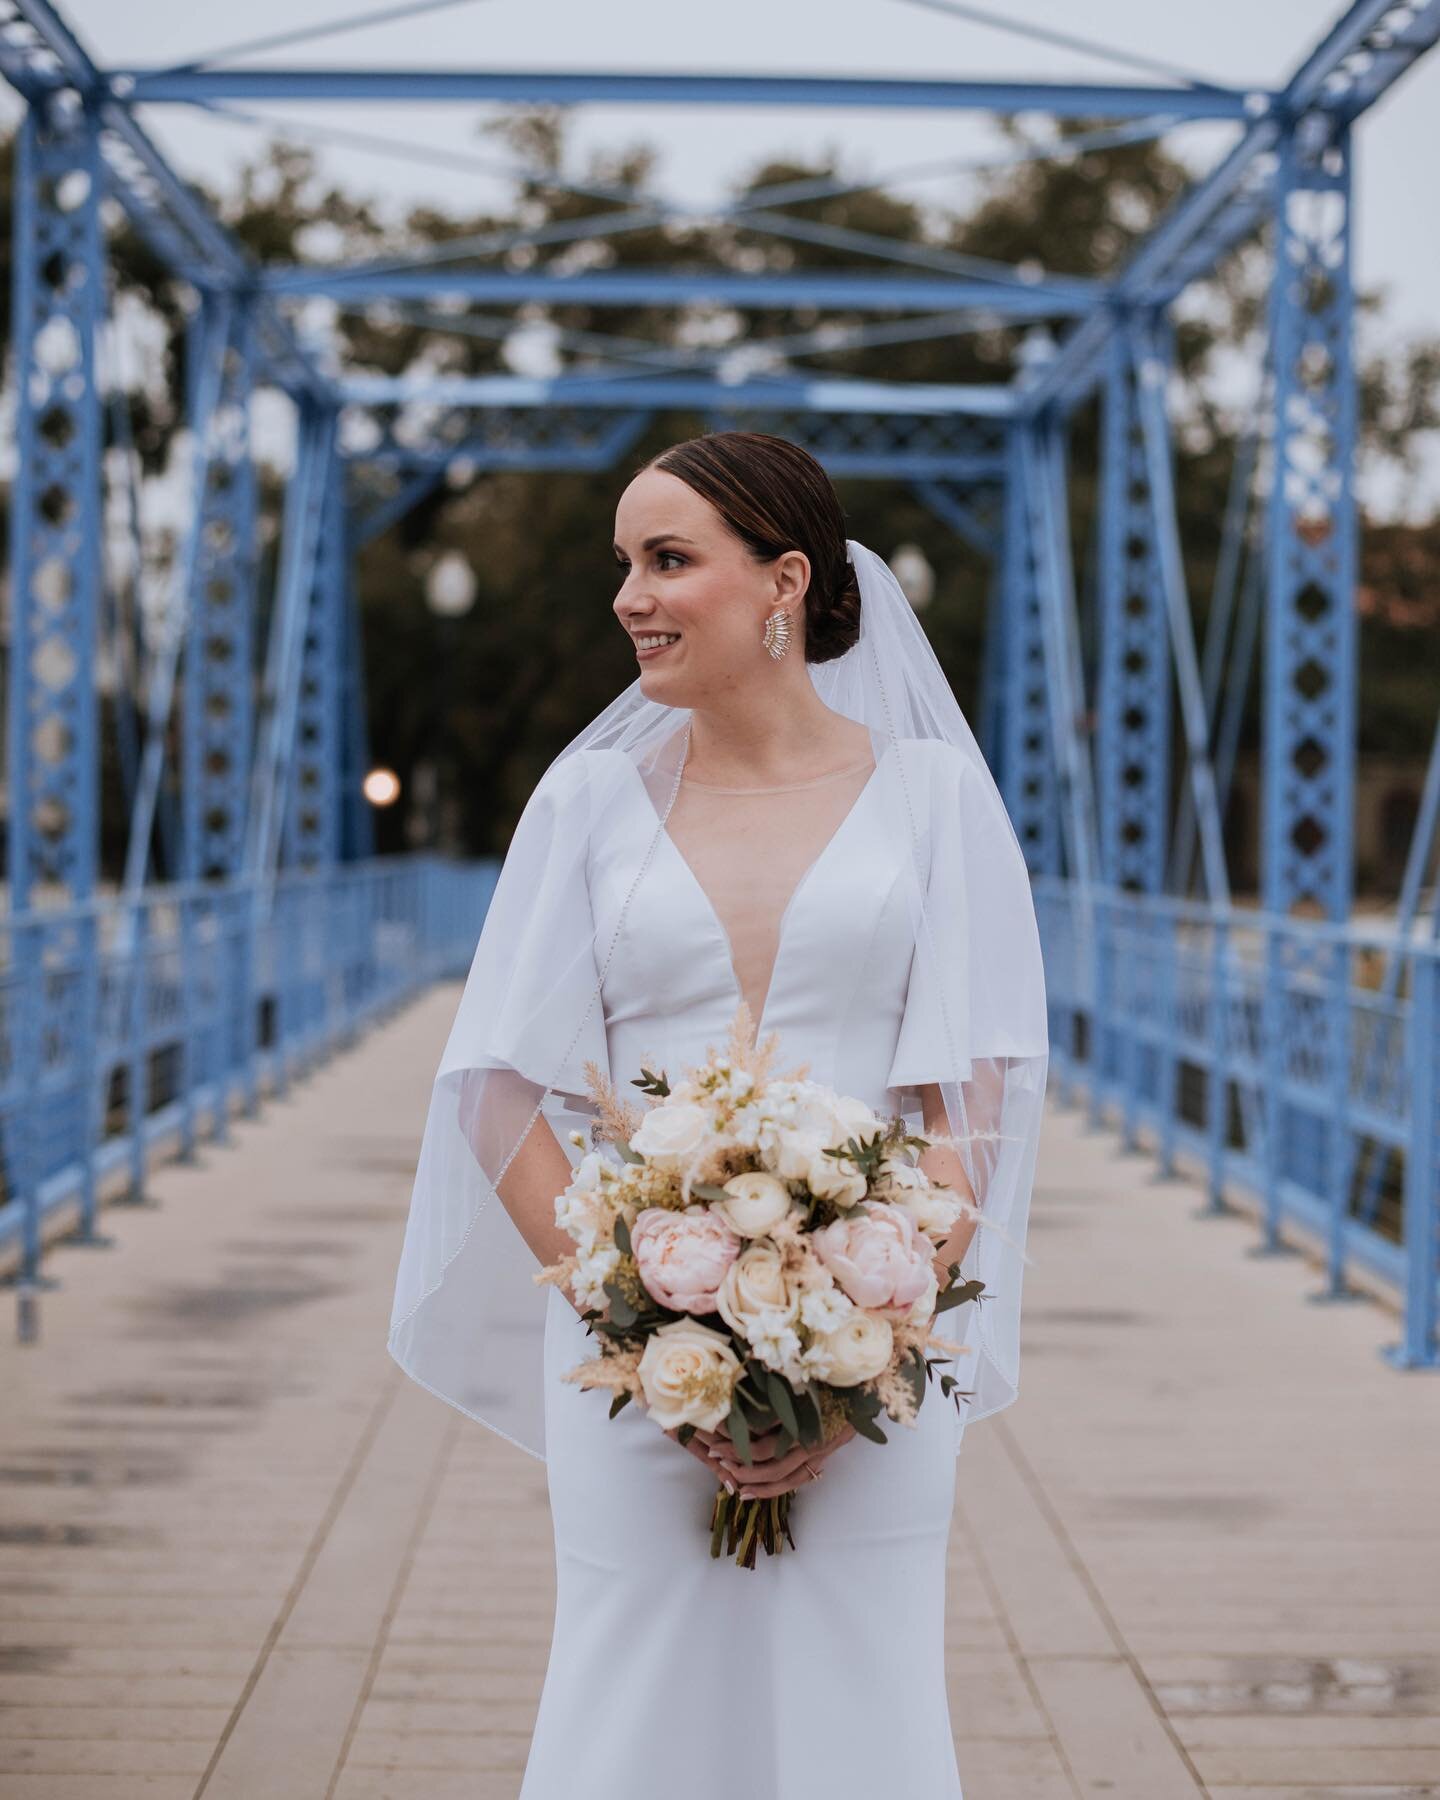 The Magnolia Bridge is the perfect spot to incorporate your &ldquo;something blue&rdquo; 💙✨on your special day! 

Wedding Planner: @confettiandconola 
Photographer: @lovehousestudio 
HMU: @sarahwalshbeauty @sydstaehle 
Florist: @bethsflowers 

#newo